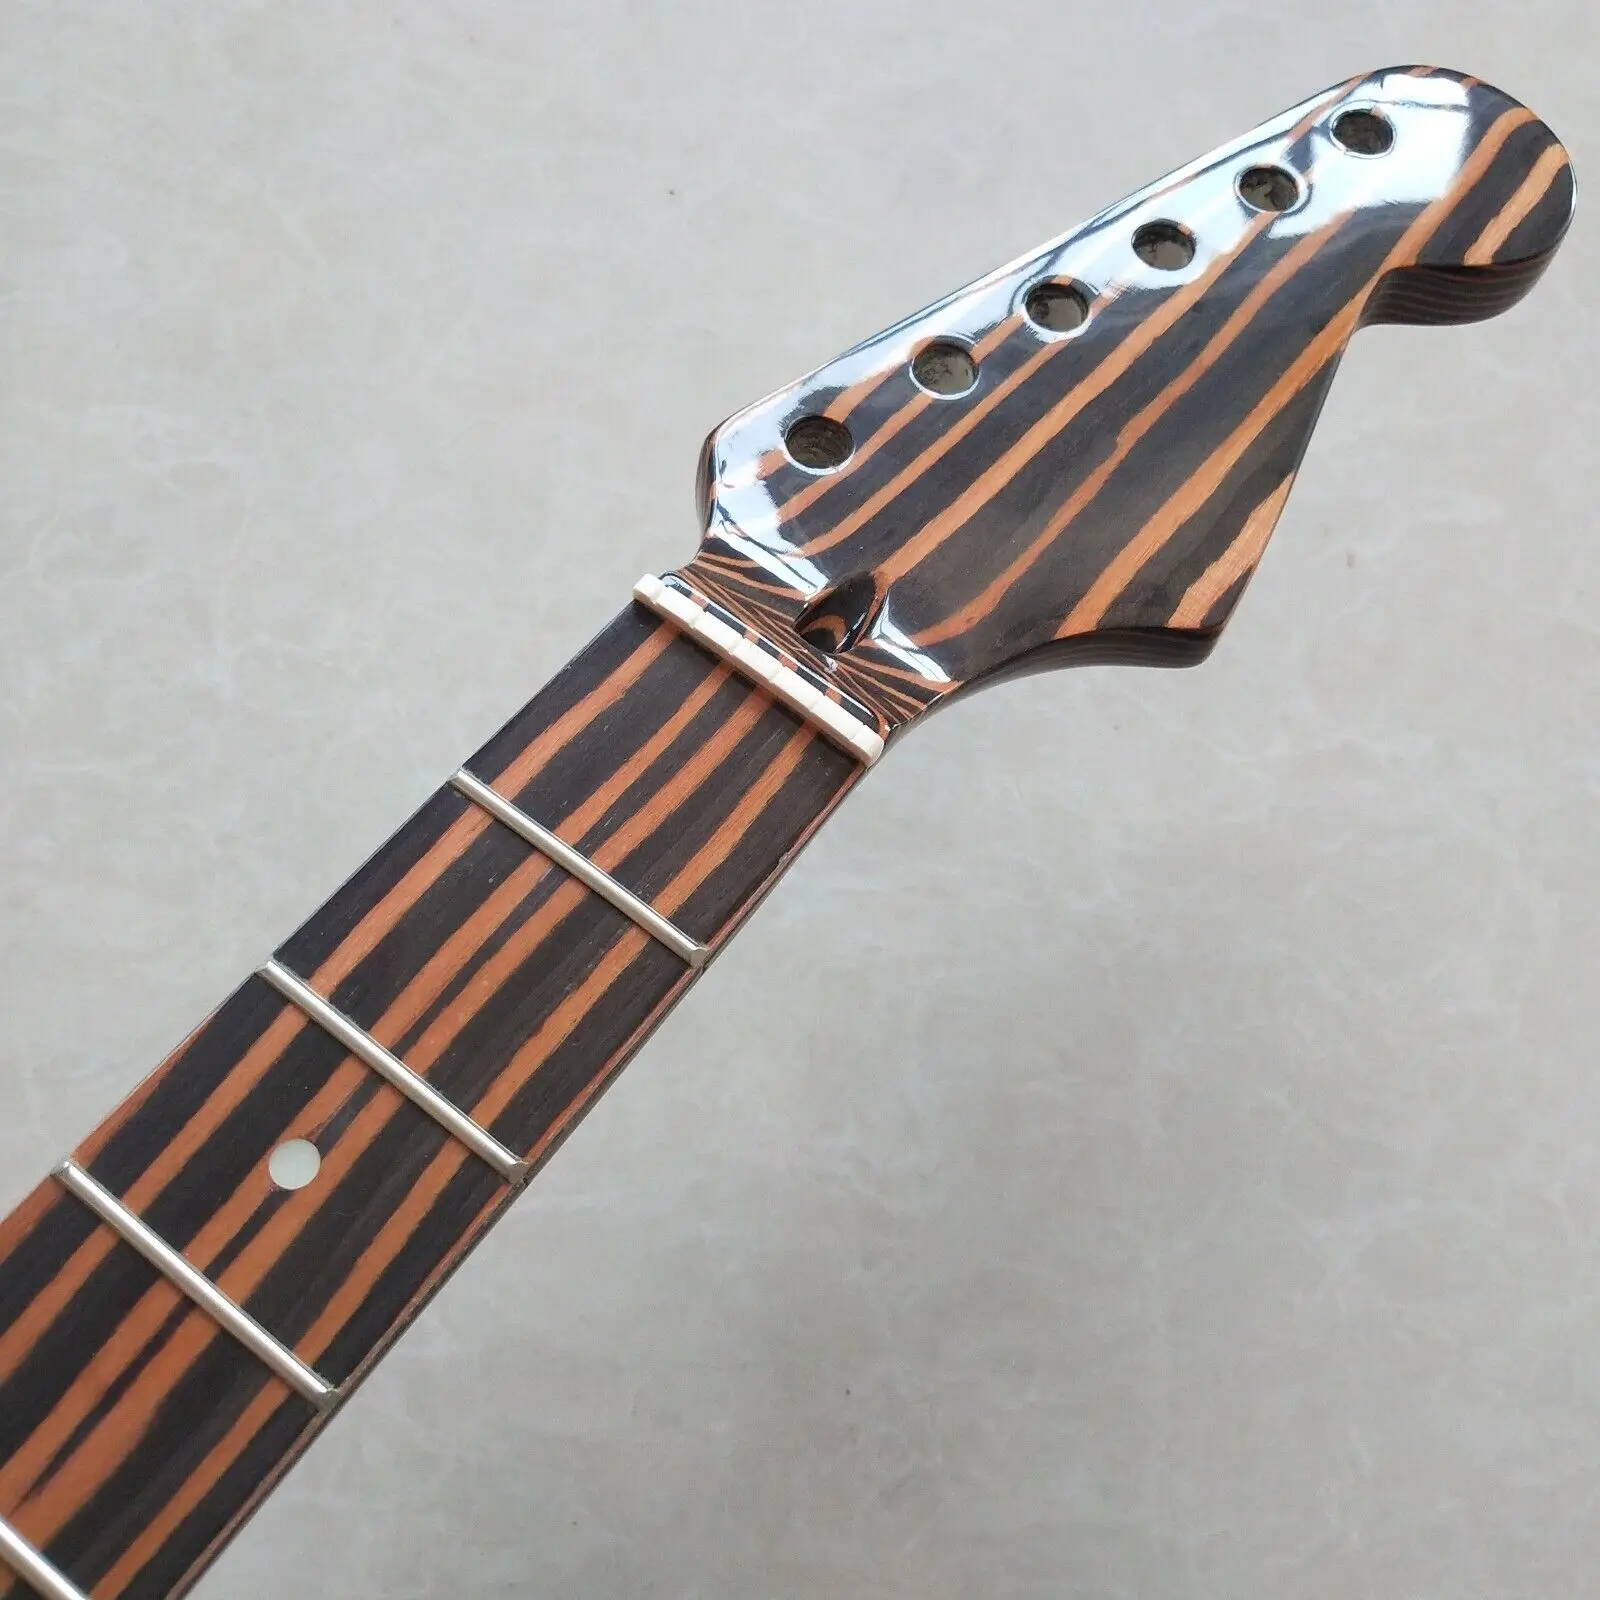 22 Frets Gloss Zebra wood Electric Guitar Neck 25.5in Fretboard dots inlay parts